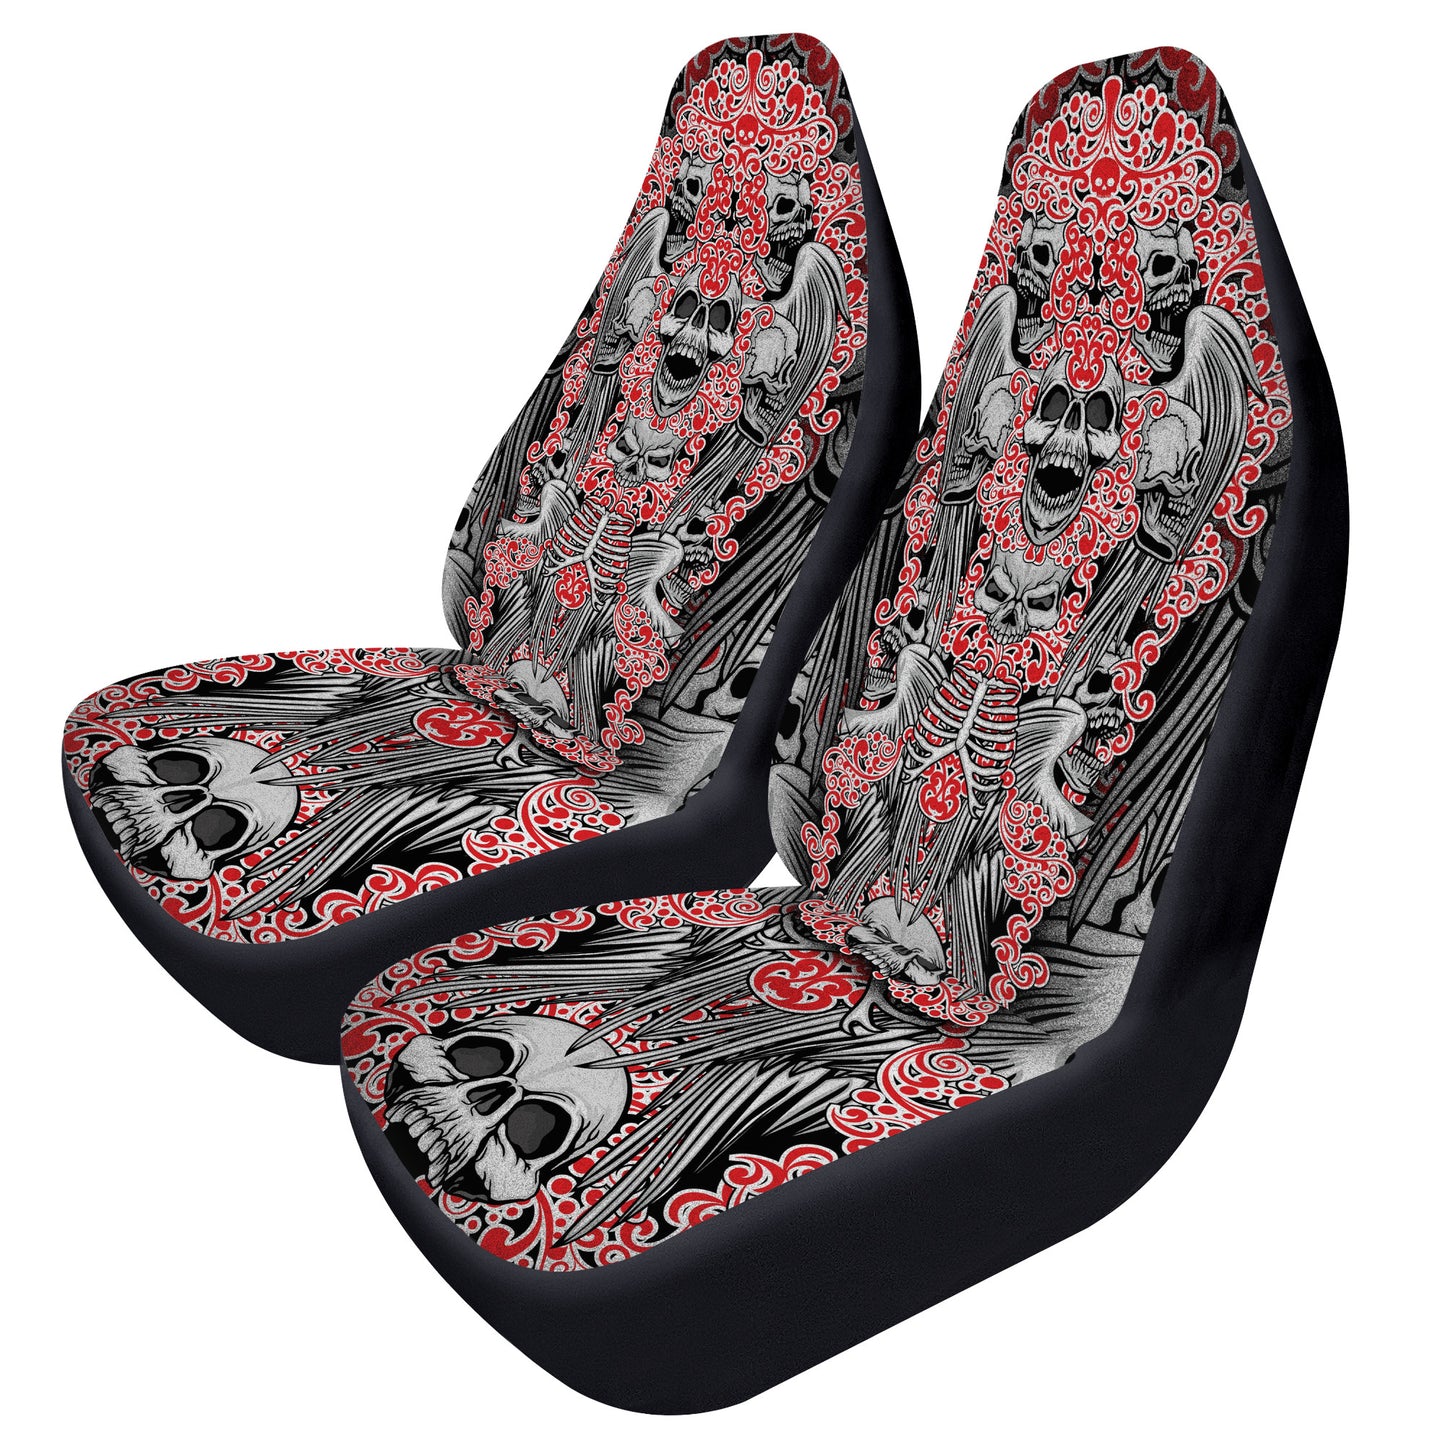 Vintage Skull Car Seat Covers